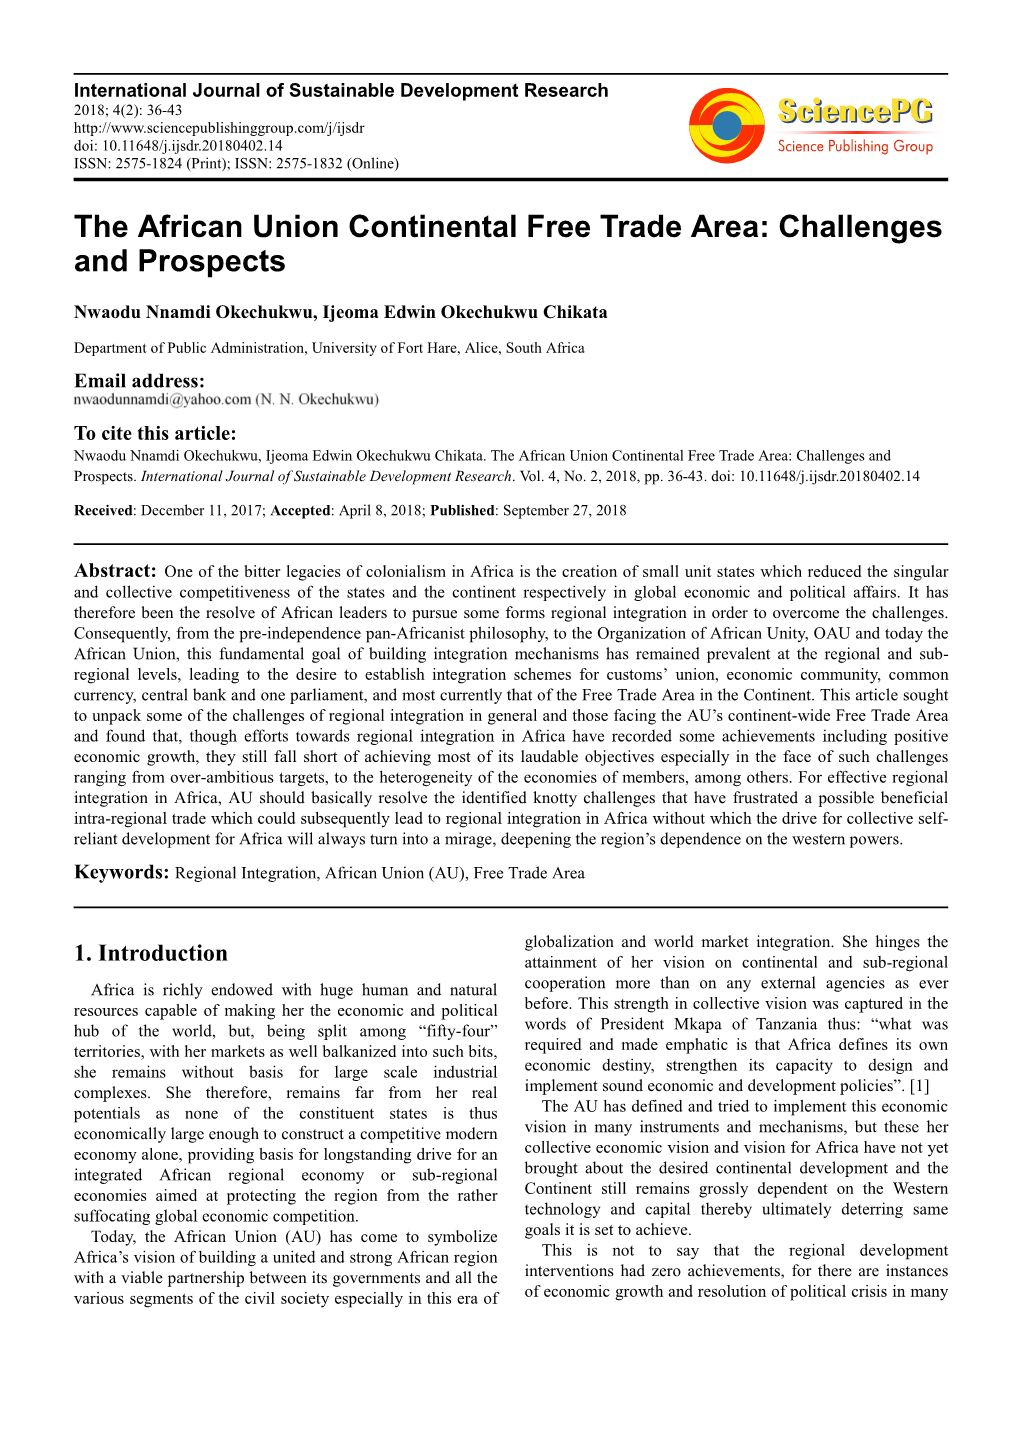 The African Union Continental Free Trade Area: Challenges and Prospects